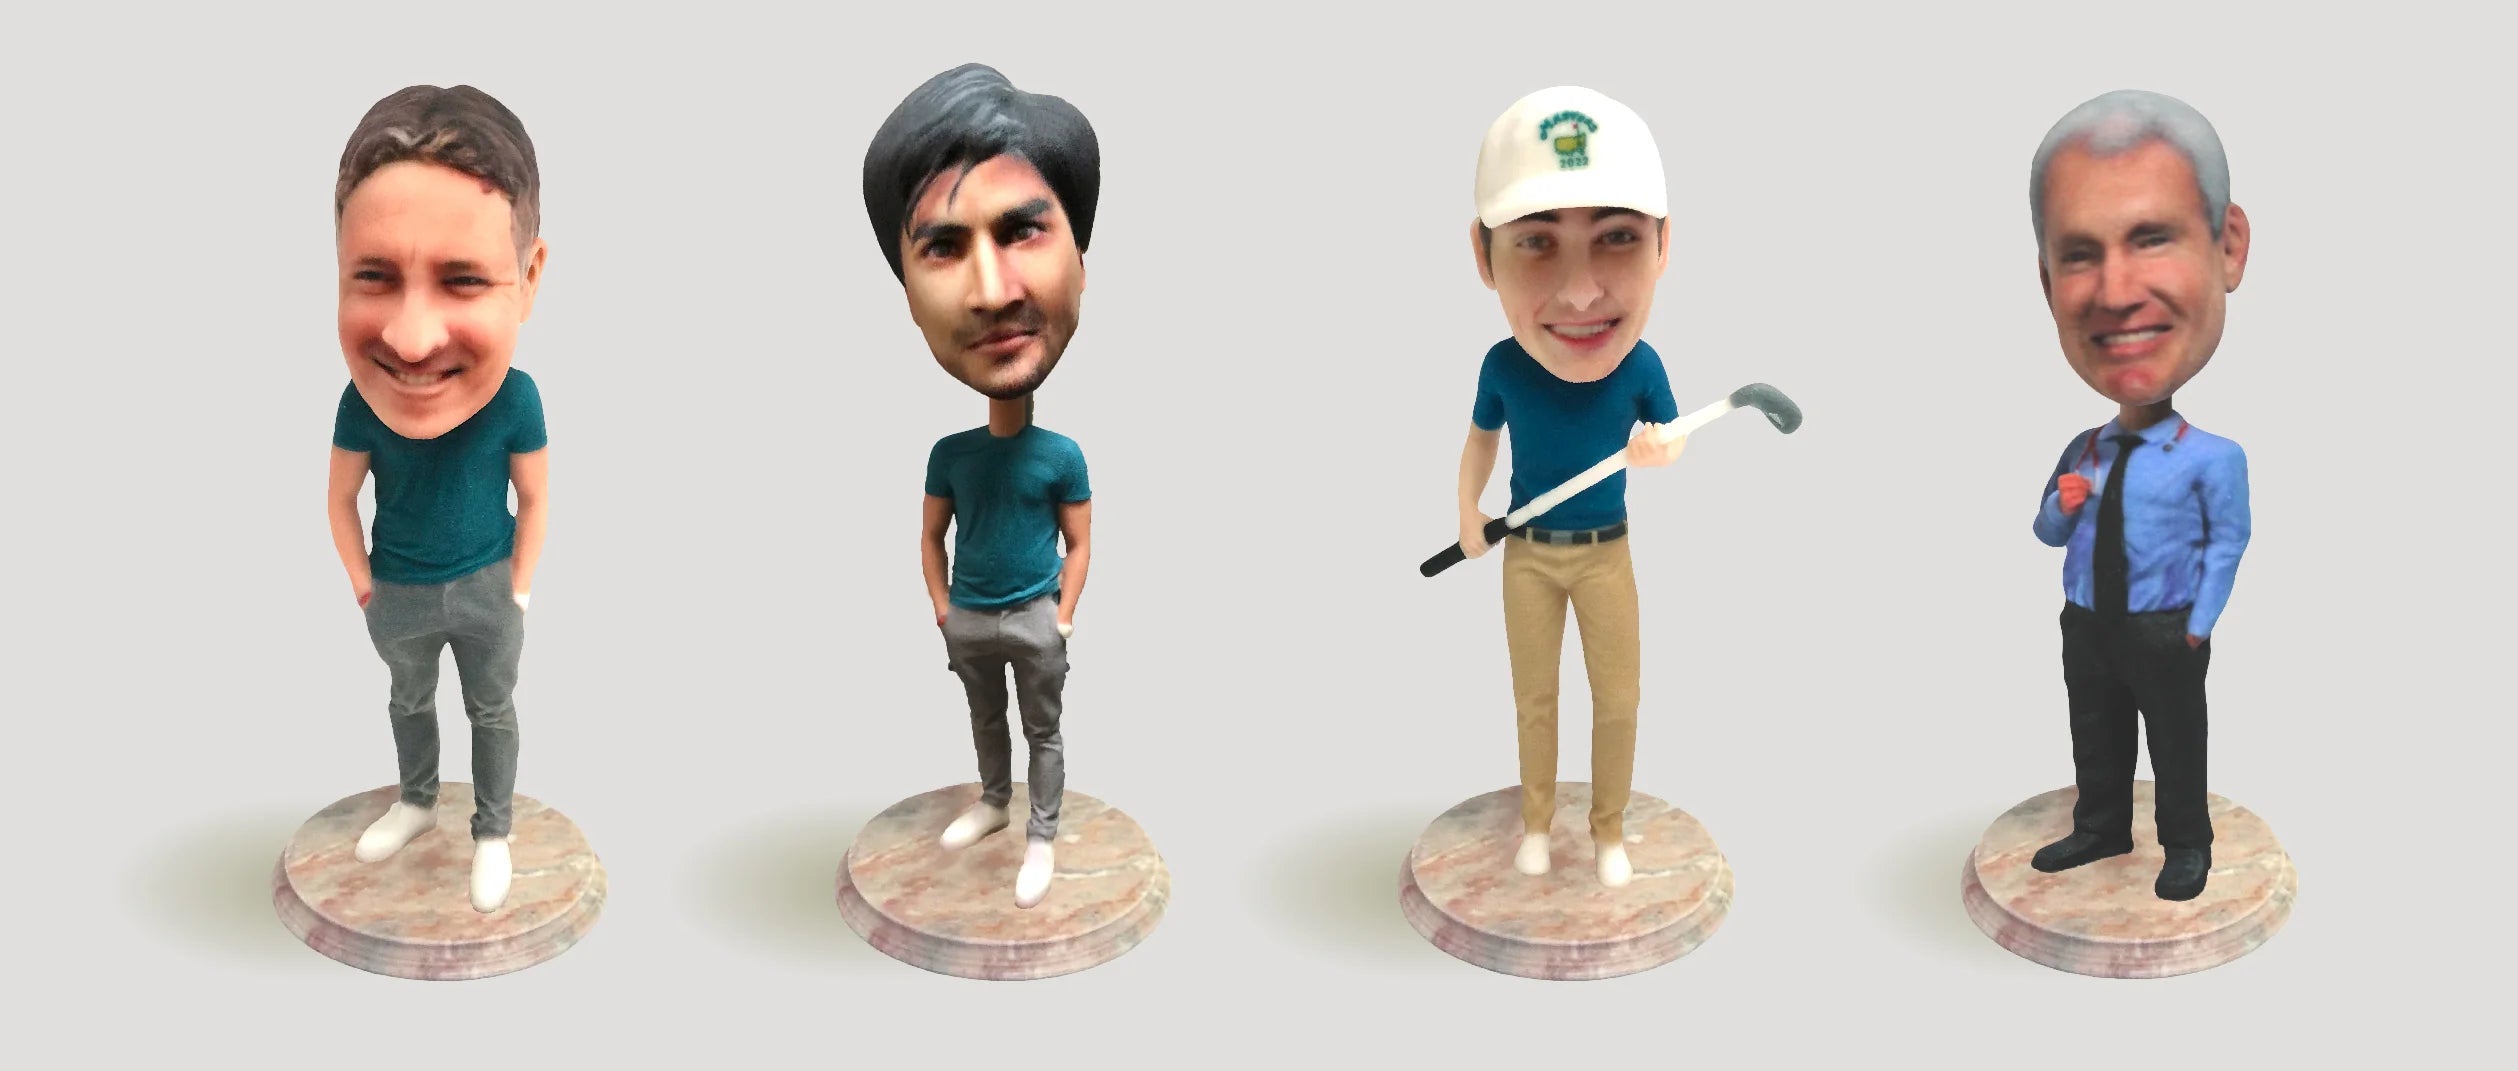 Personalized vs. Collector Bobbleheads - Which is Right for You?